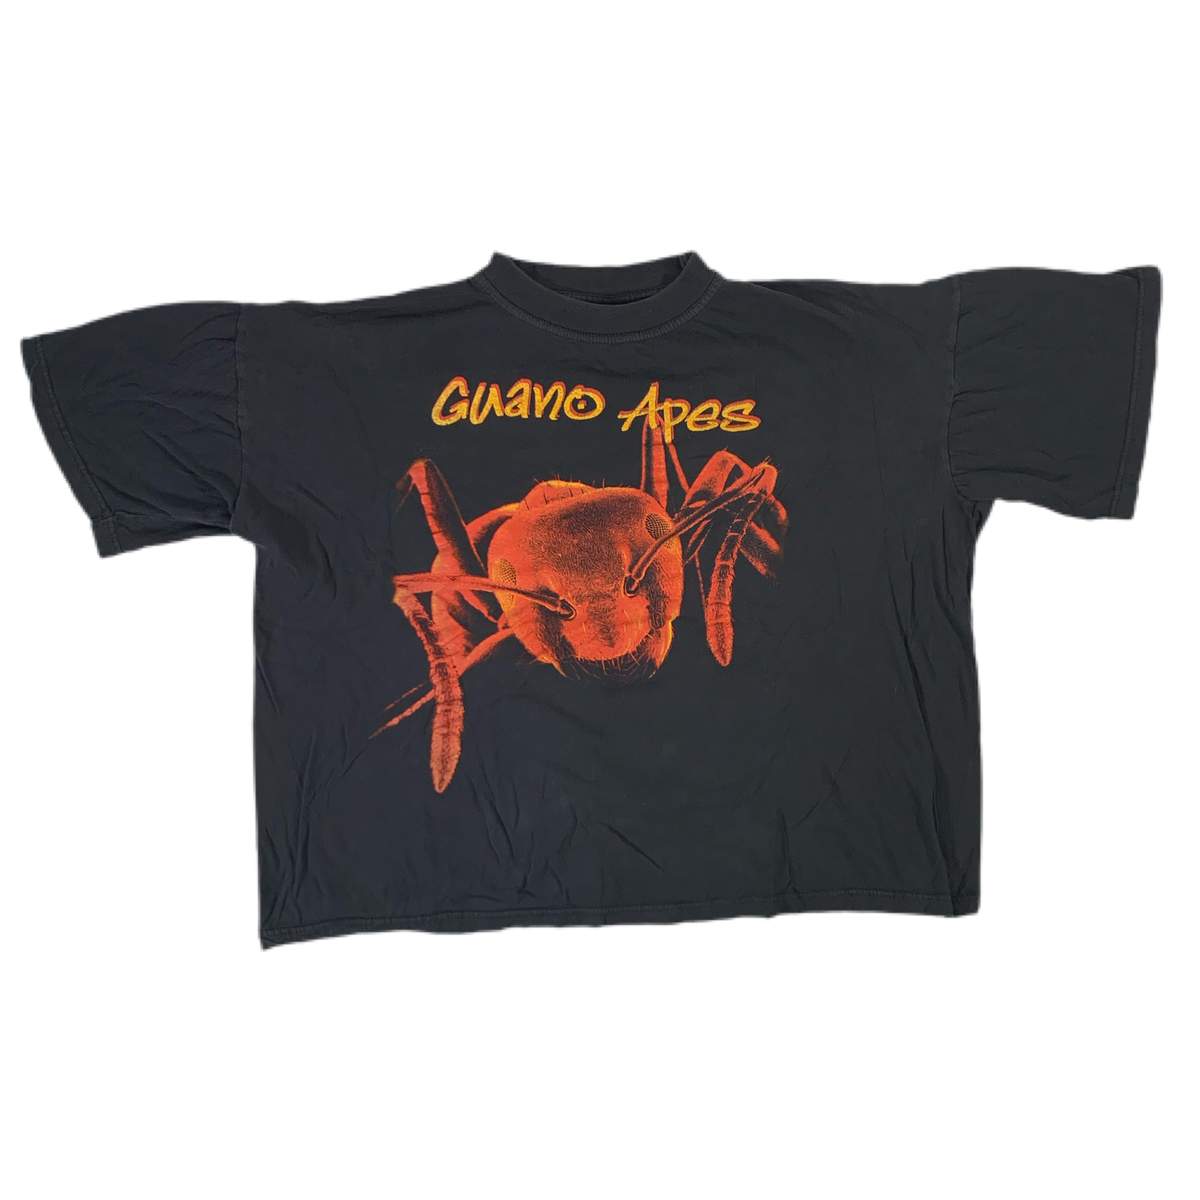 Vintage Guano Apes “Don’t Give Me Names” T-Shirt - jointcustodydc